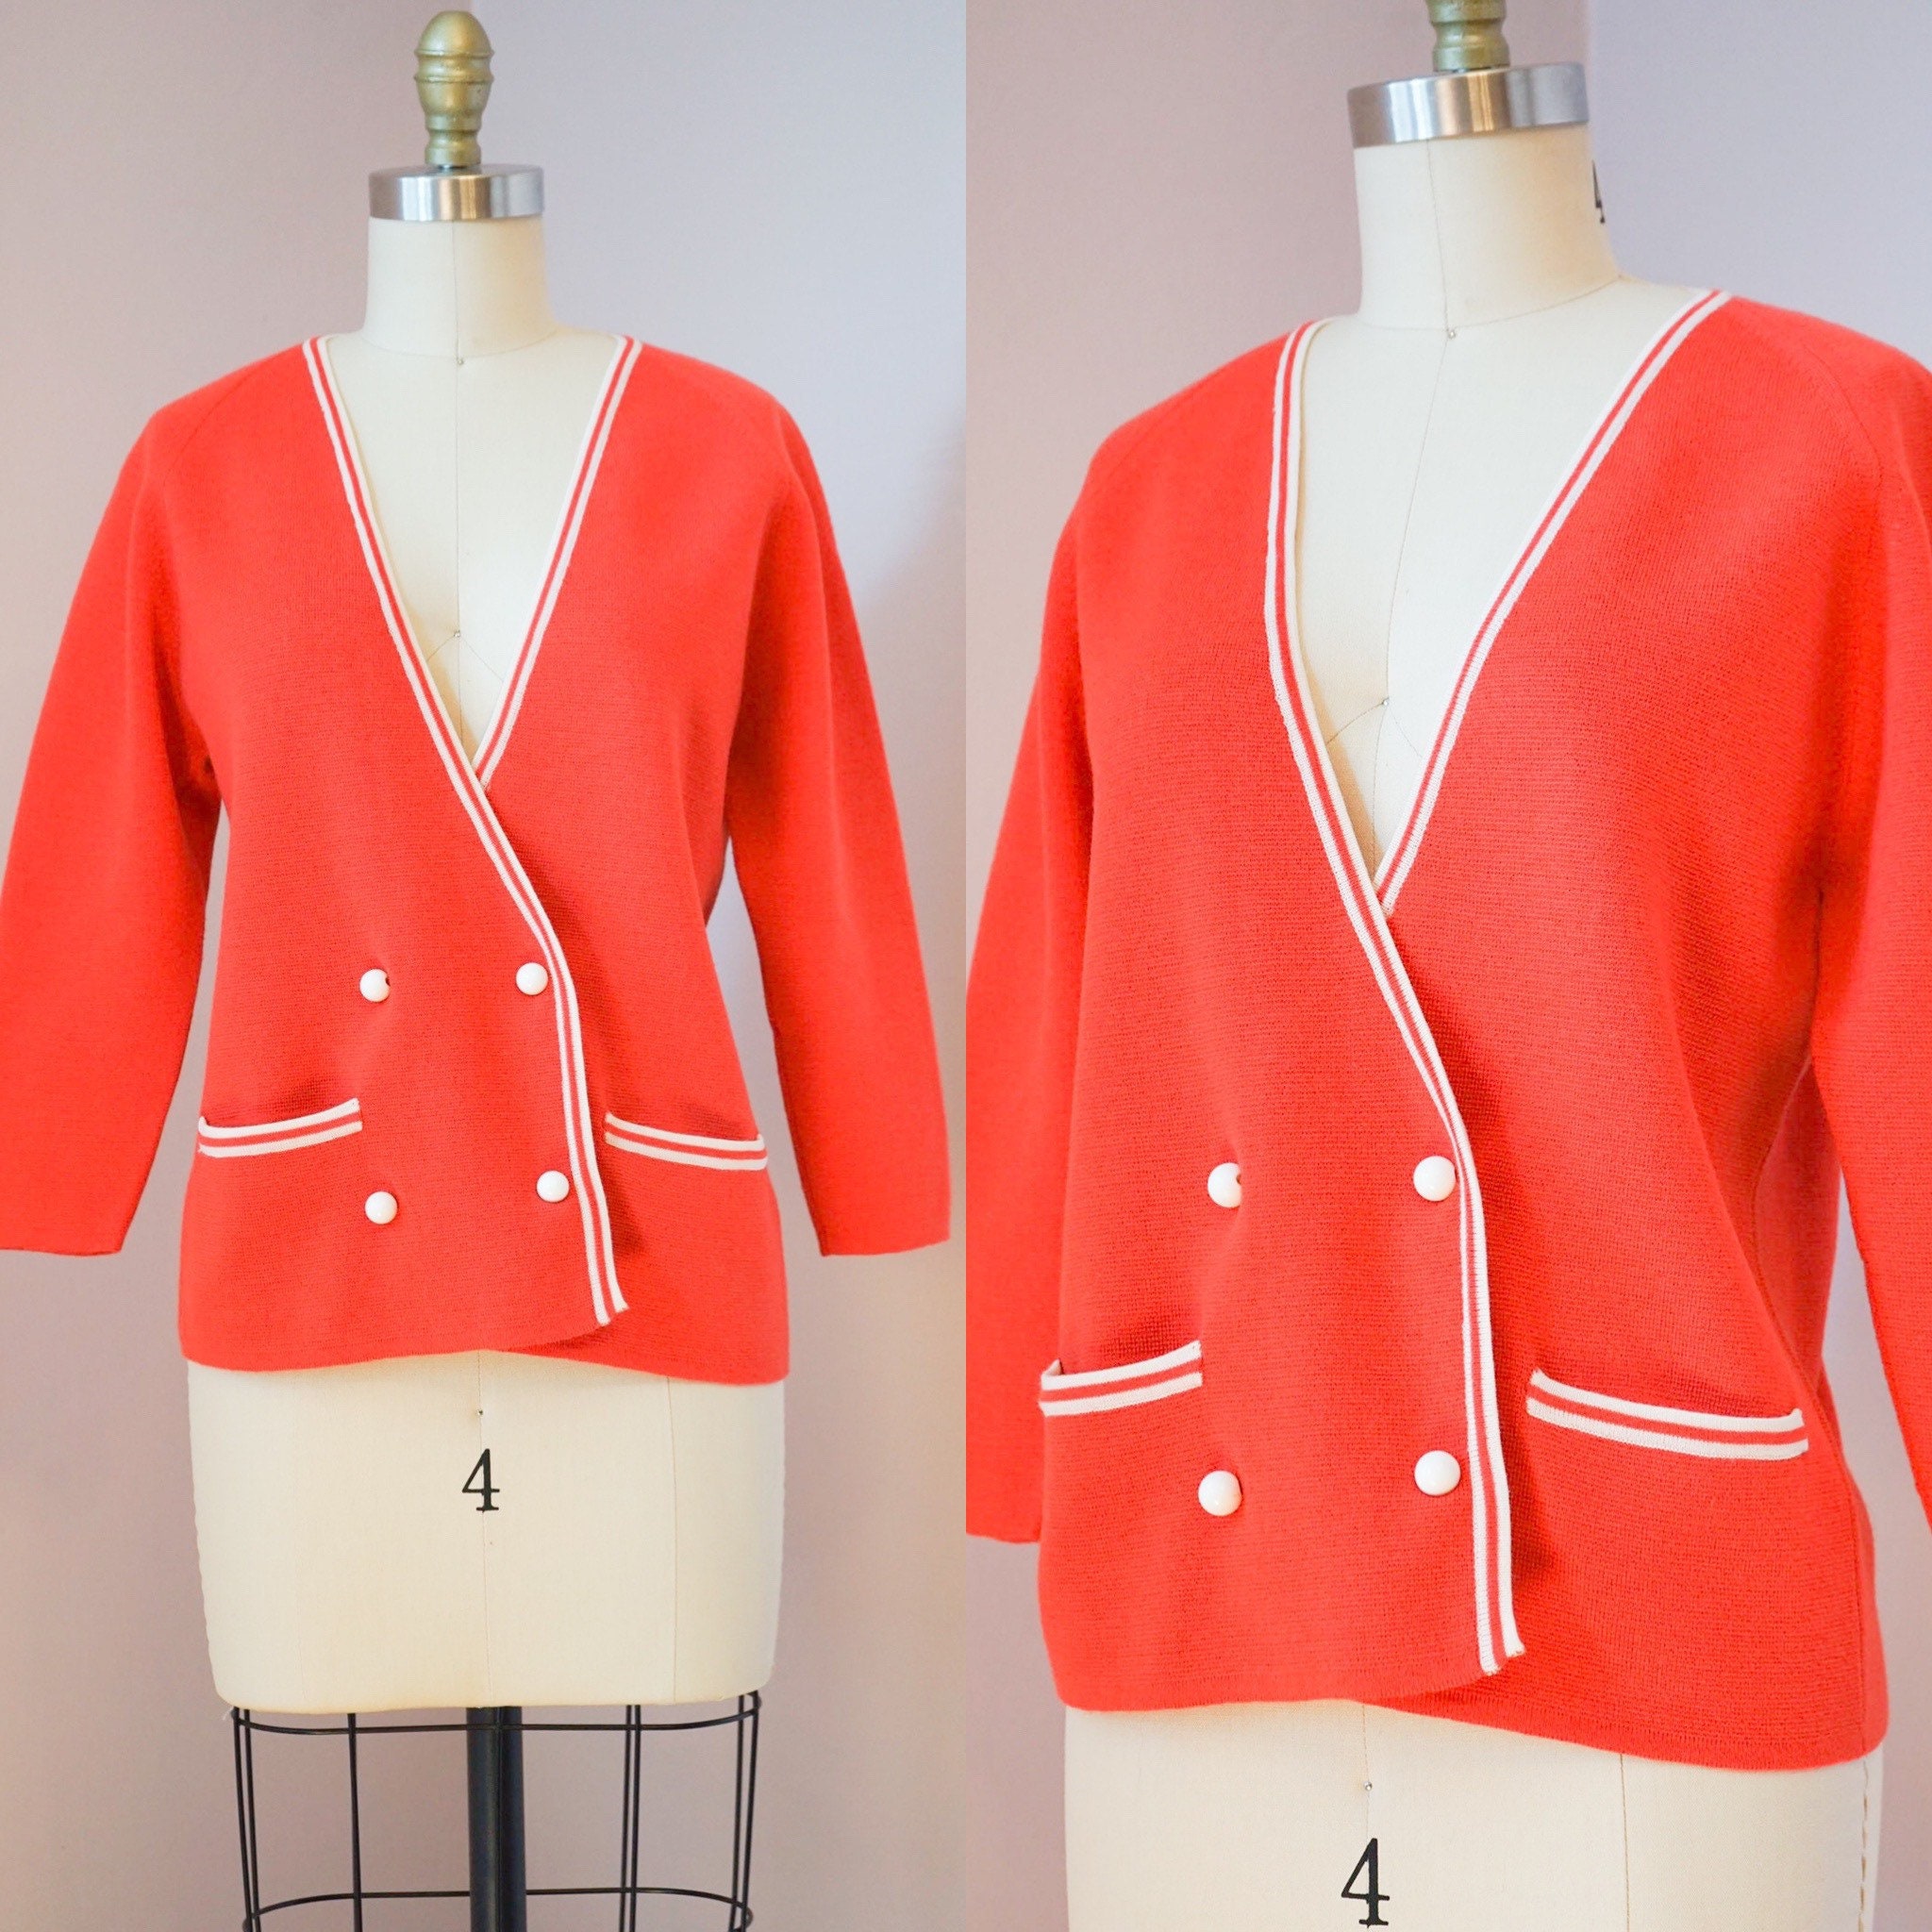 made in Italy 60s vintage cardigan.